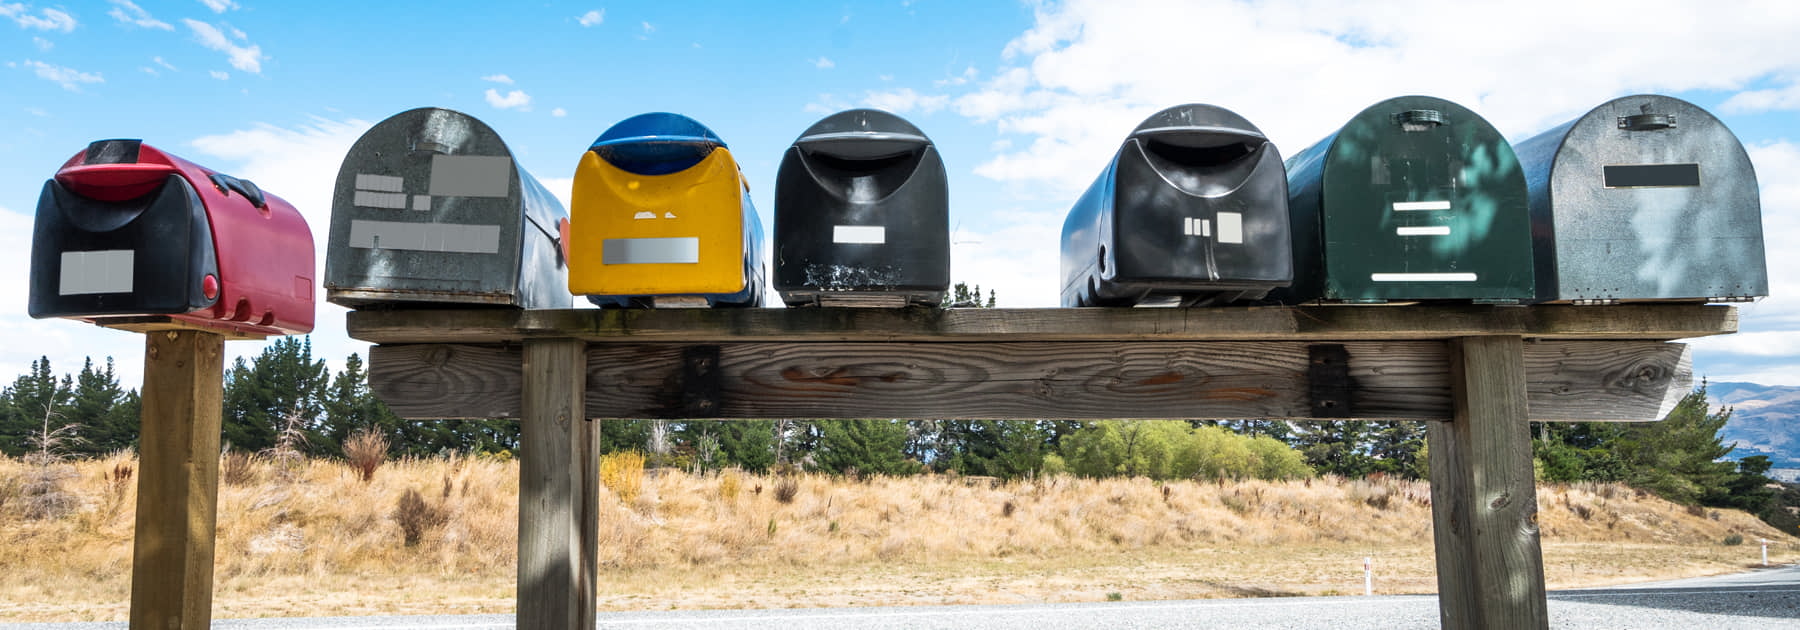 US mailboxes